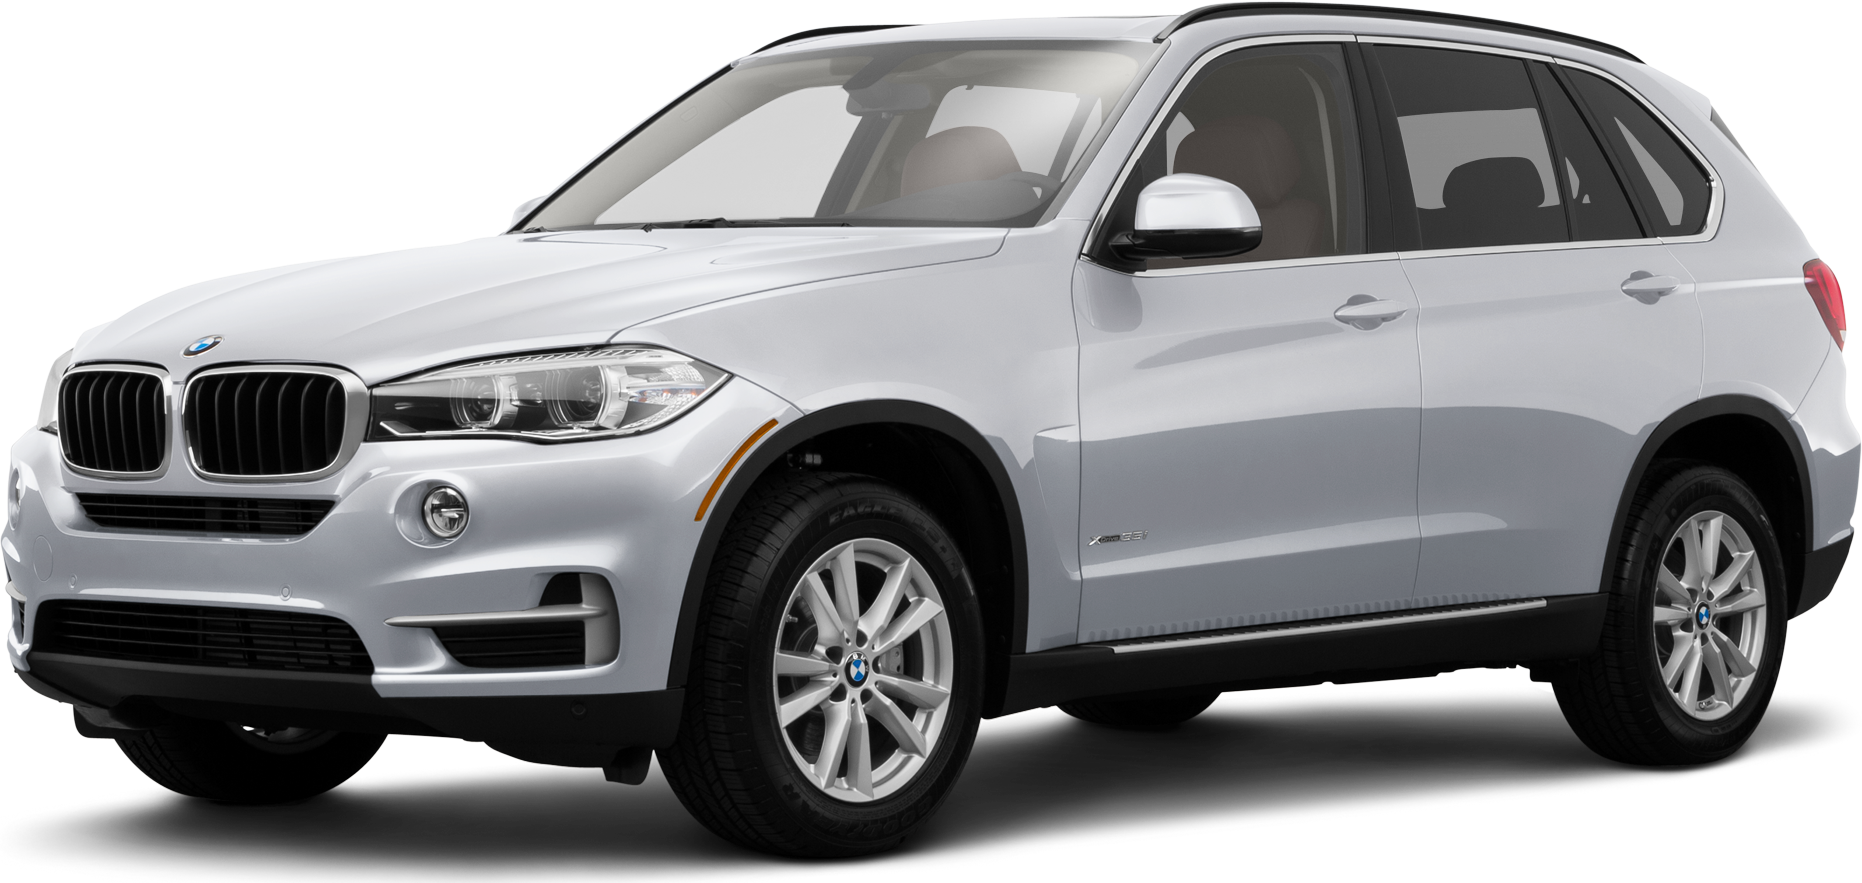 2015 BMW X5 Price, Value, Ratings & Reviews